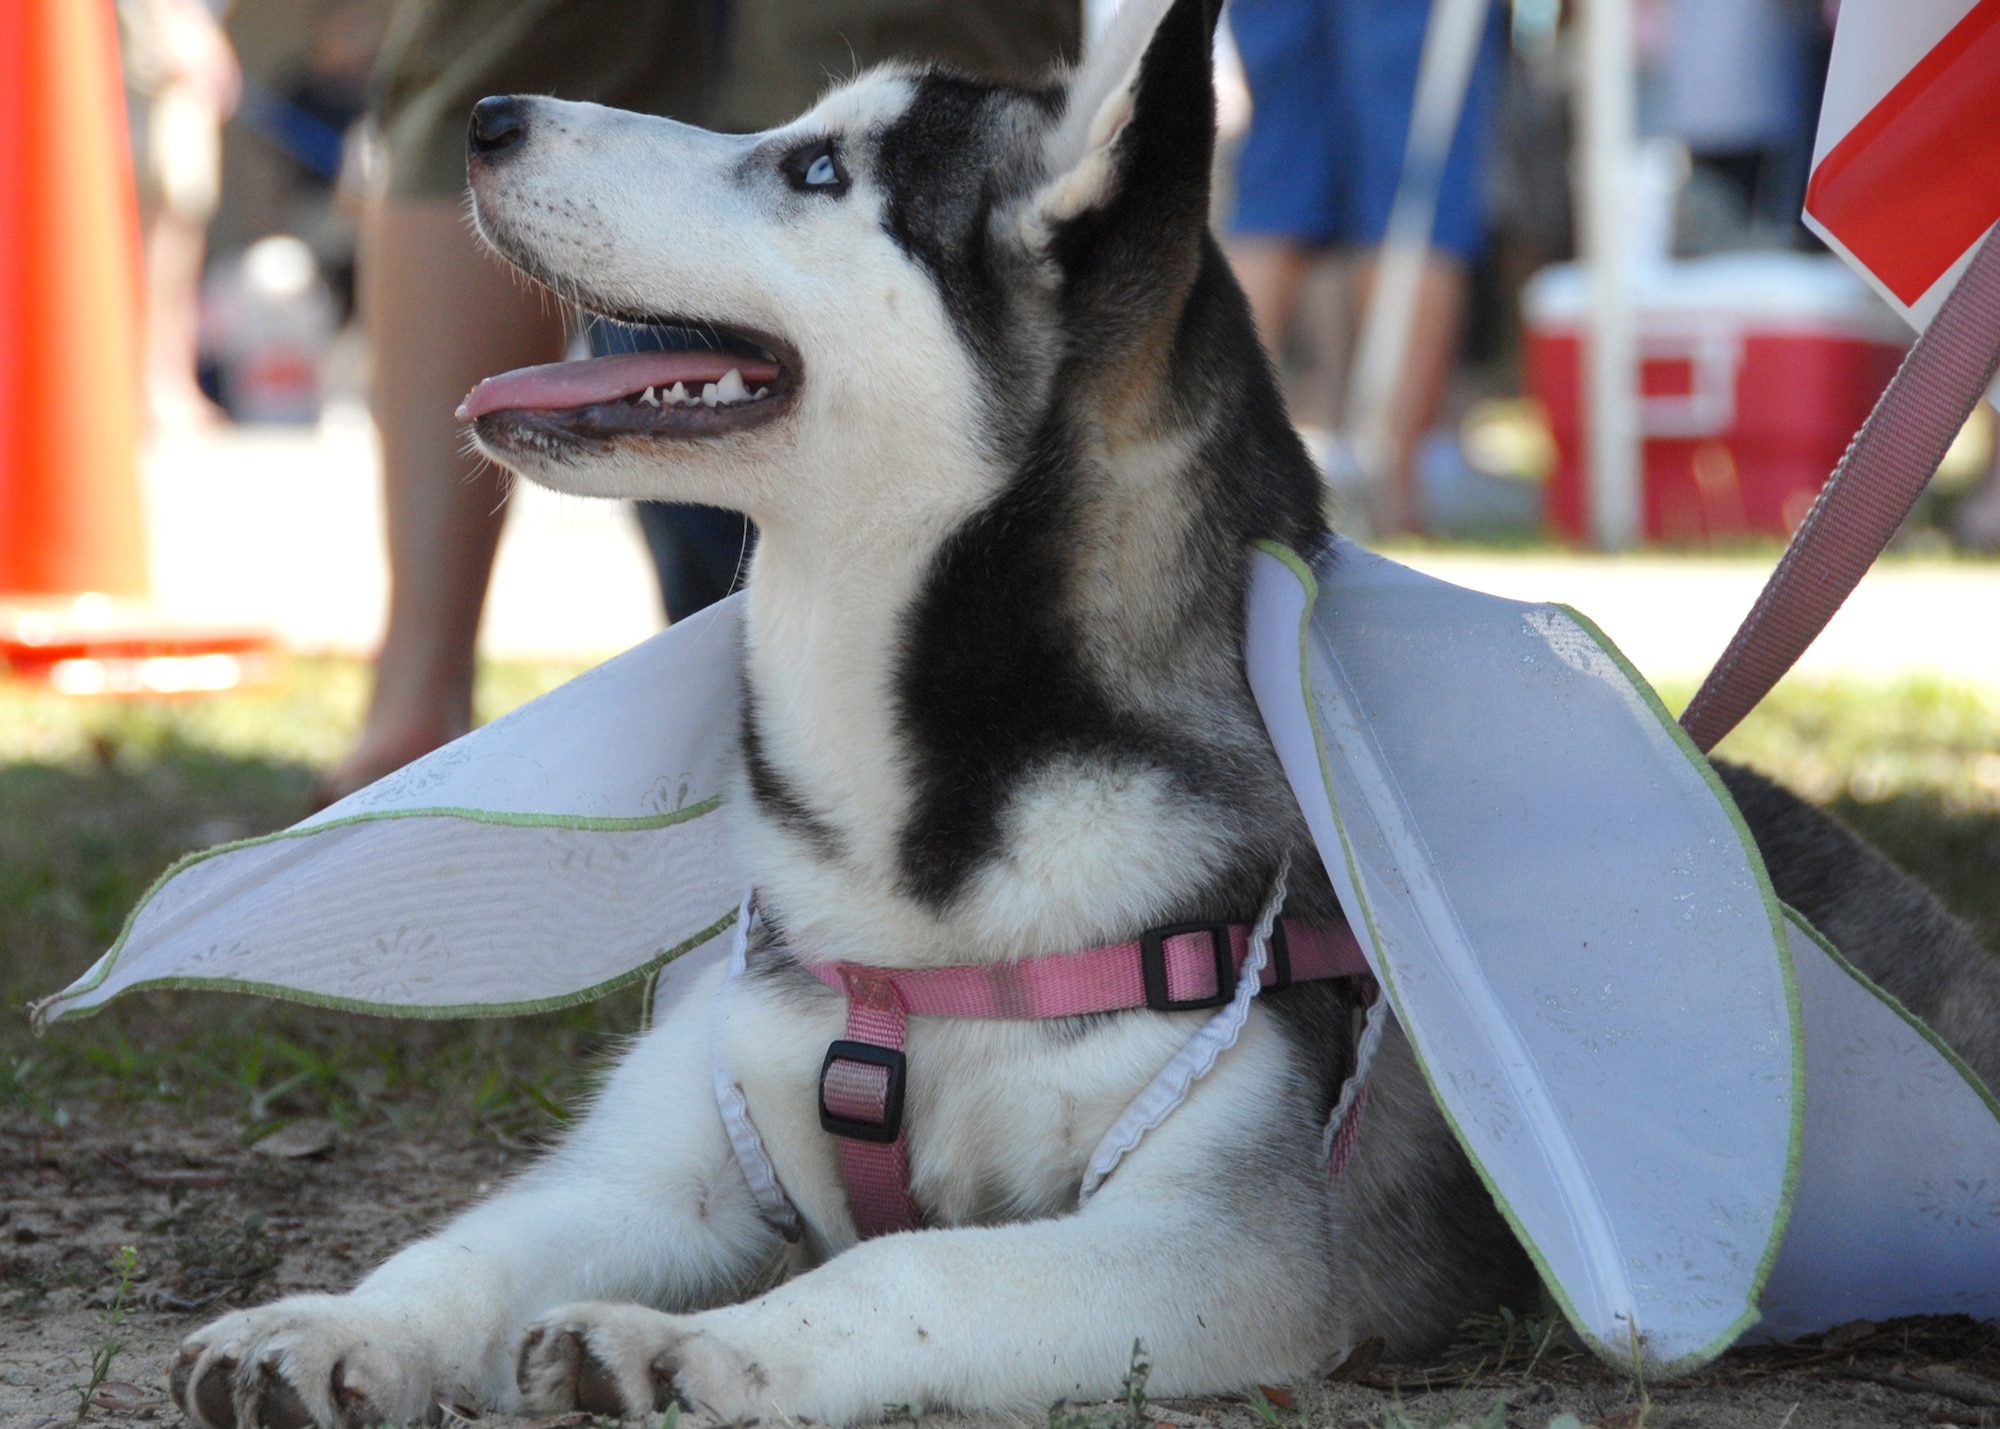 A “winged” Husky puppy takes a break during the Eglin Air Force Base Pet Show May 22.  The pet show was dominated by canines this year with dogs of all sizes populating the sidewalks in front of the Enlisted Hall.  Pet Welfare had animals available for adoption and vendors had pet clothes and scarves available for sale.  96th Security Forces Squadron military working dogs were also on hand.  The winners were “Bear," (Best trick), “Bella” (Best costume), "Scruffy," (Most Unique) and "Ripley," (Best in show.)  (U.S. Air Force photo/Samuel King Jr.) 